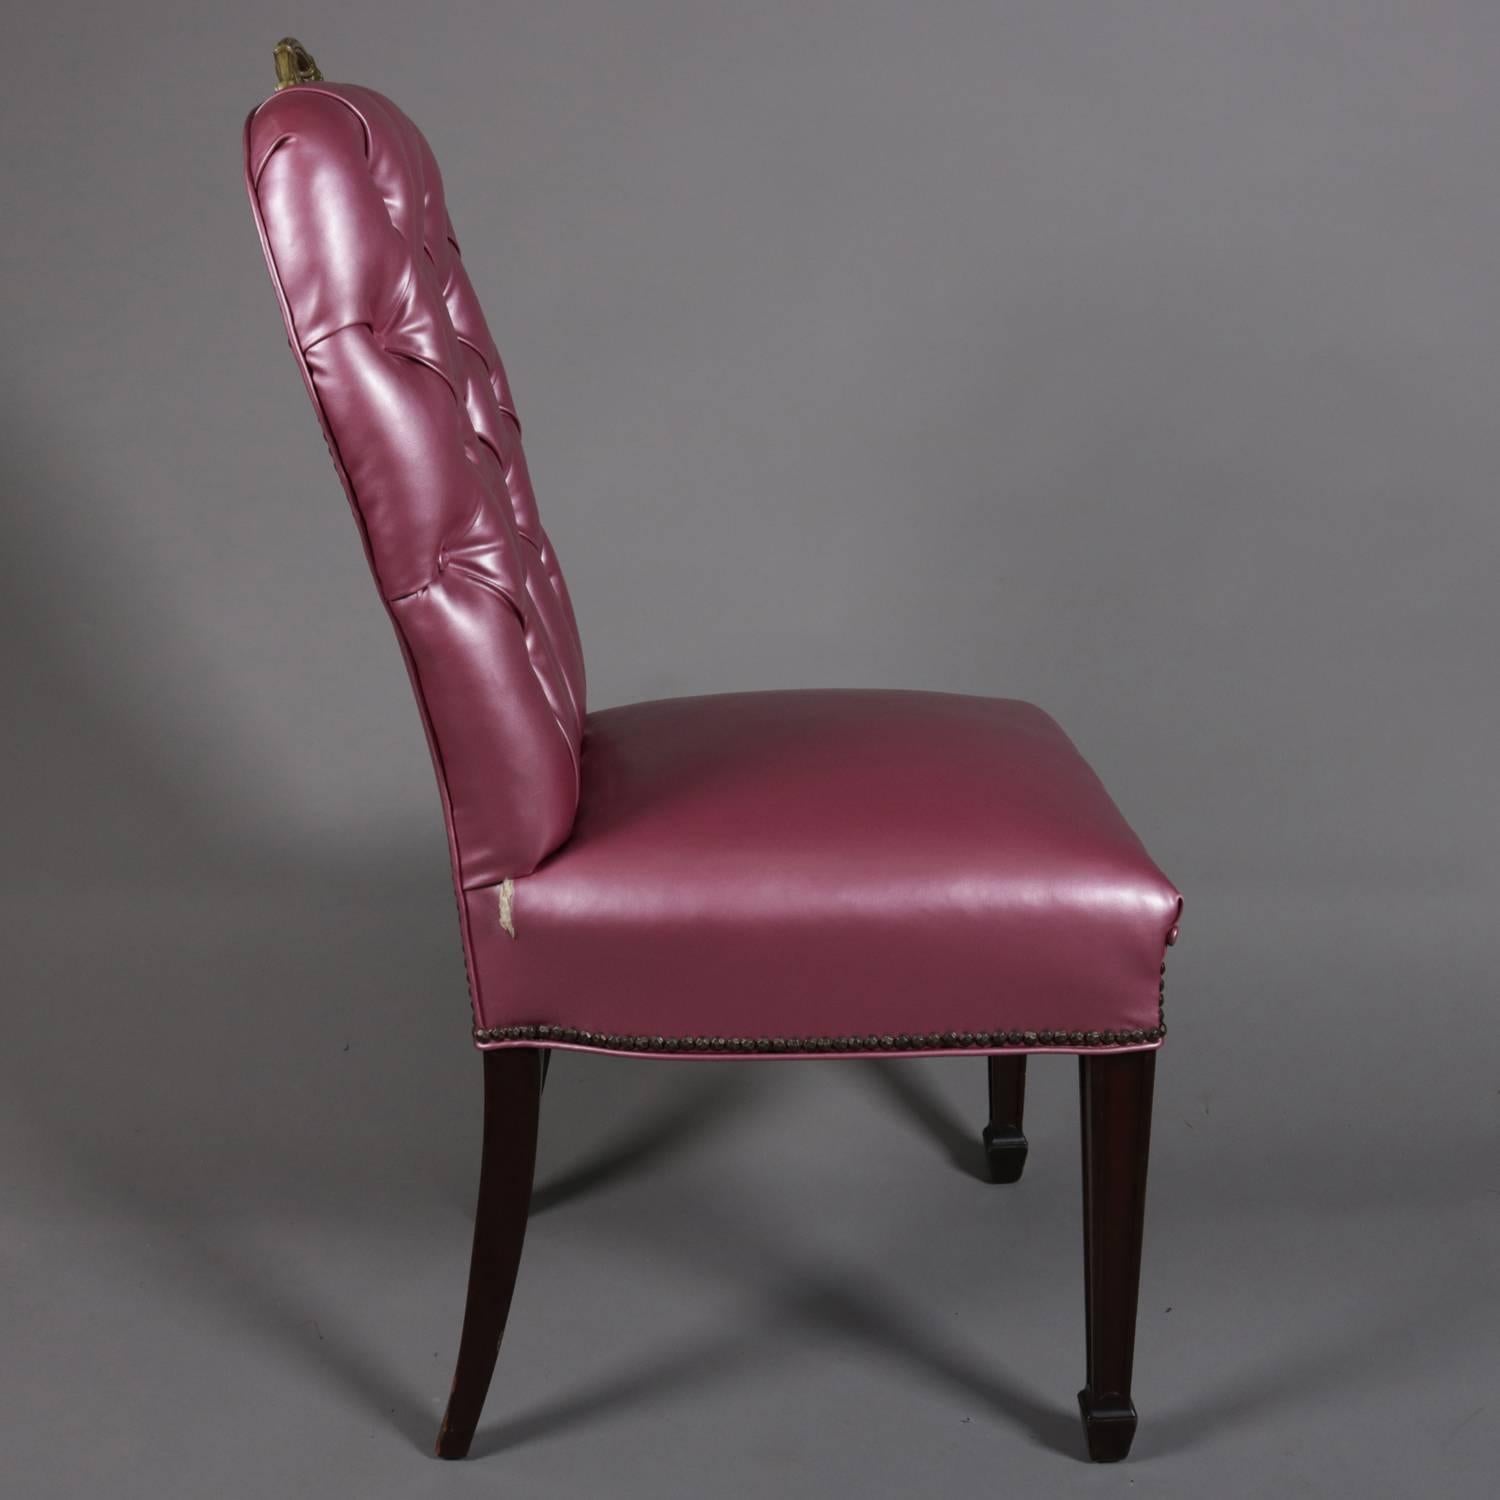 Set of four Hollywood Regency side chairs feature fuschia upholstery with button tuft backs with brass handles, 20th century

Measures: 40